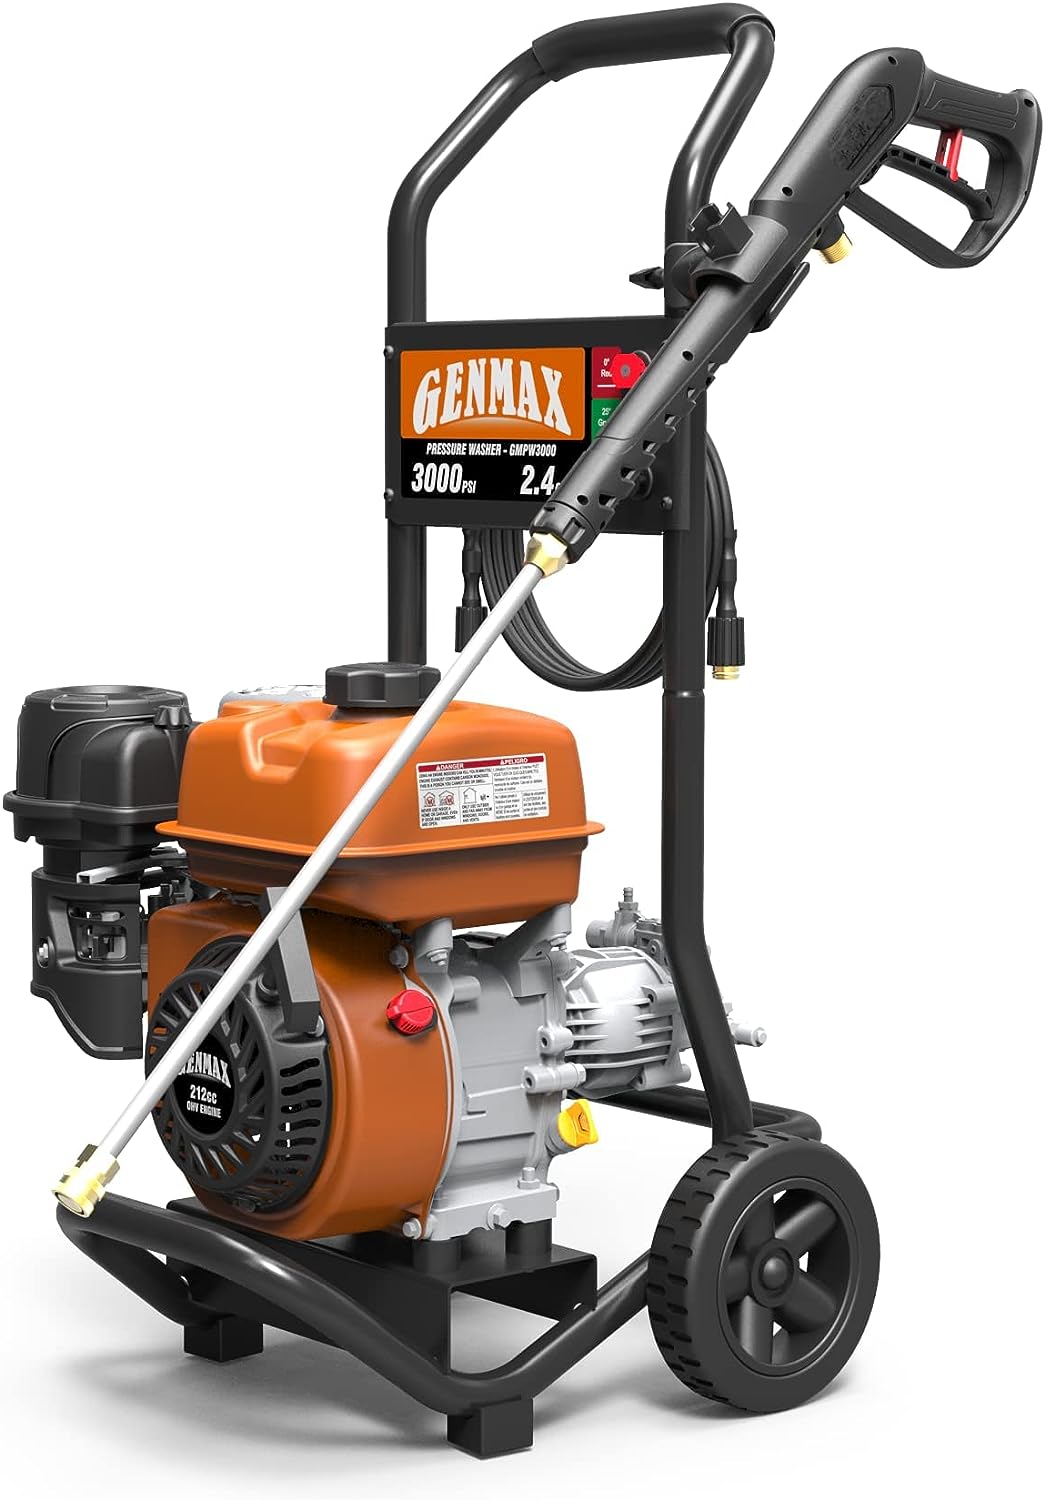 GENMAX, GENMAX GMGPW3000-H 3000 PSI and 2.4 GPM Gas Pressure Washer New